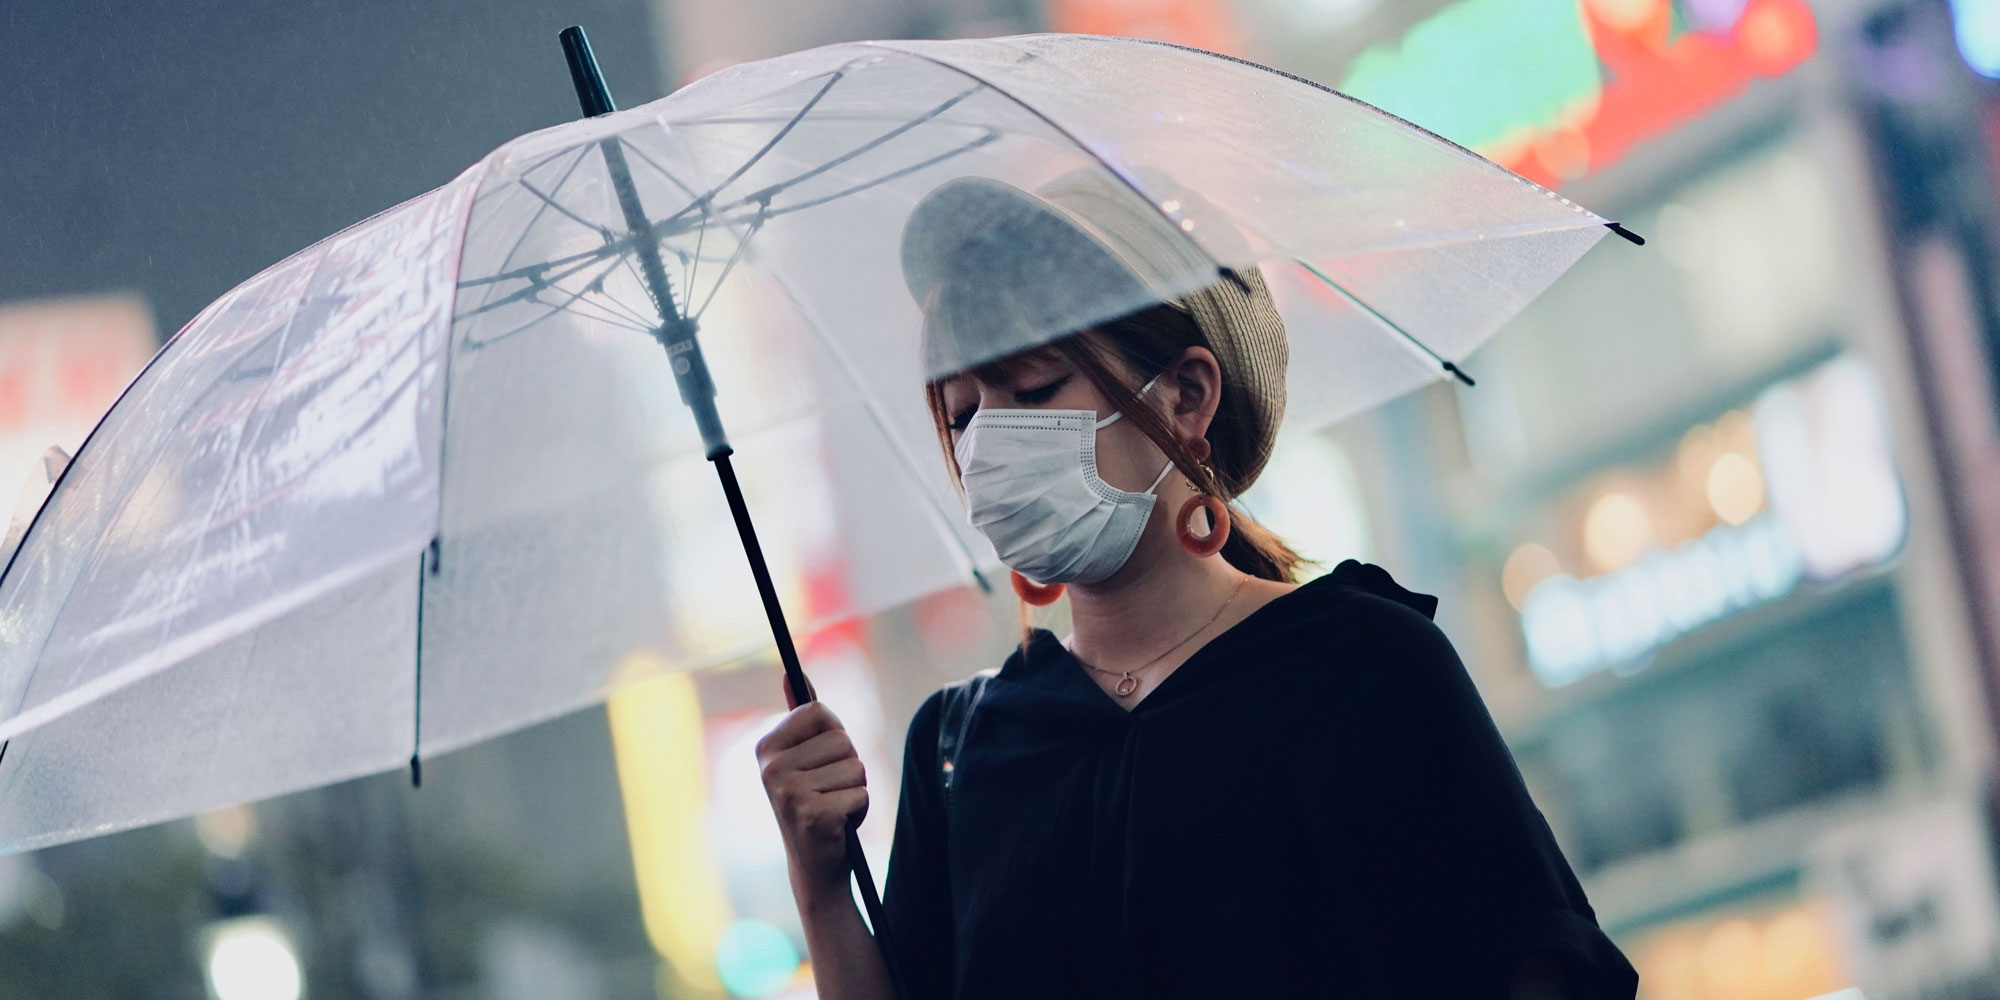 woman wearing surgical mask, holding an umbrella